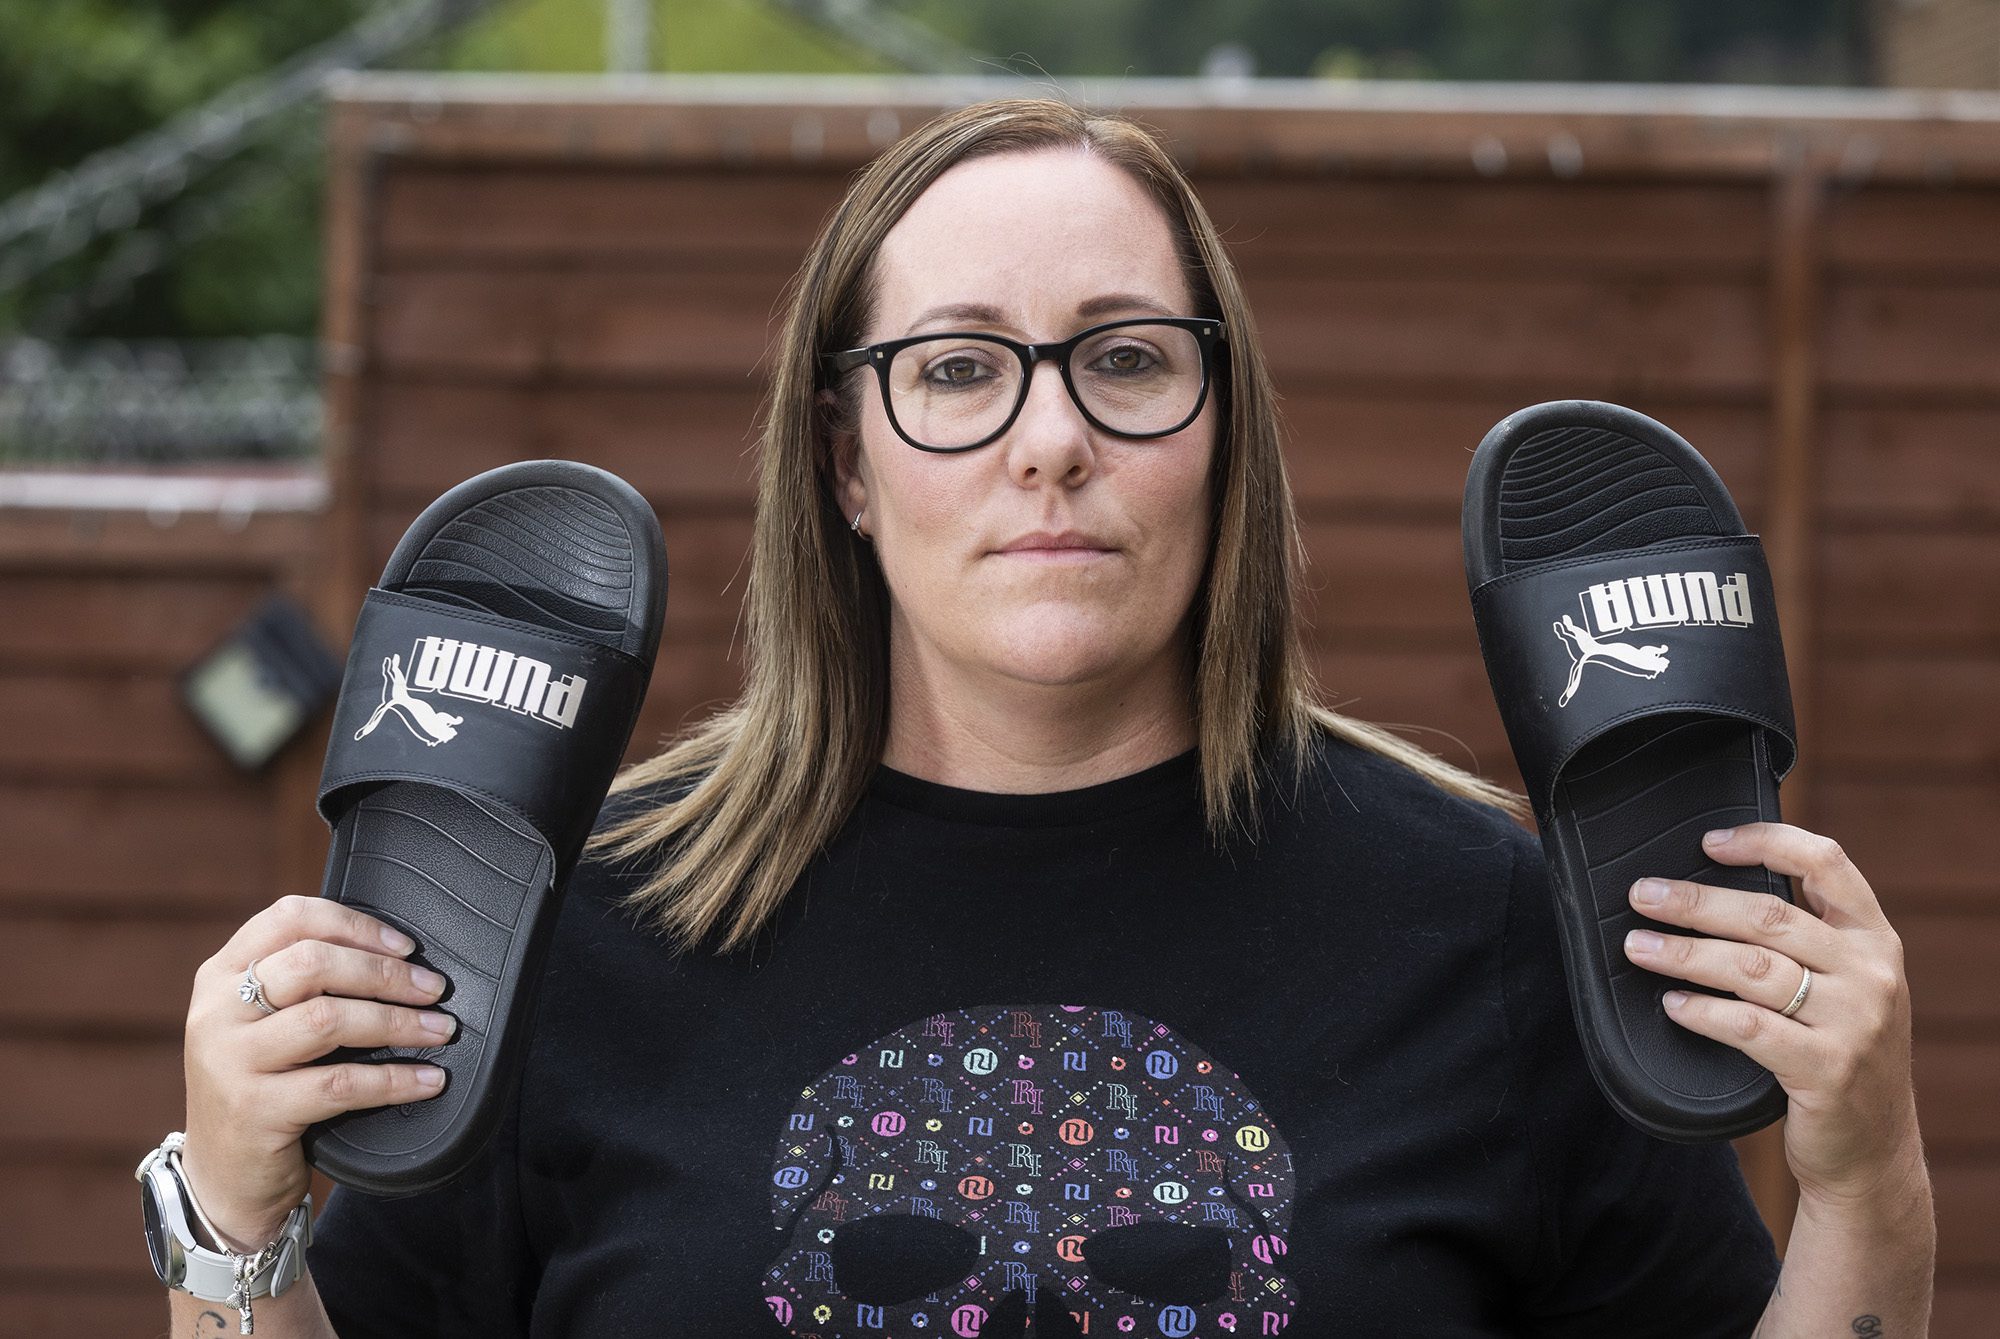 Kerry Tattersley has revealed how a $36 pair of Puma sliders saved her life after she was electrocuted while vacuuming her astroturf, pictured at her home in Halifax, England. Undated photo. (Lee McLean,SWNS/Zenger)